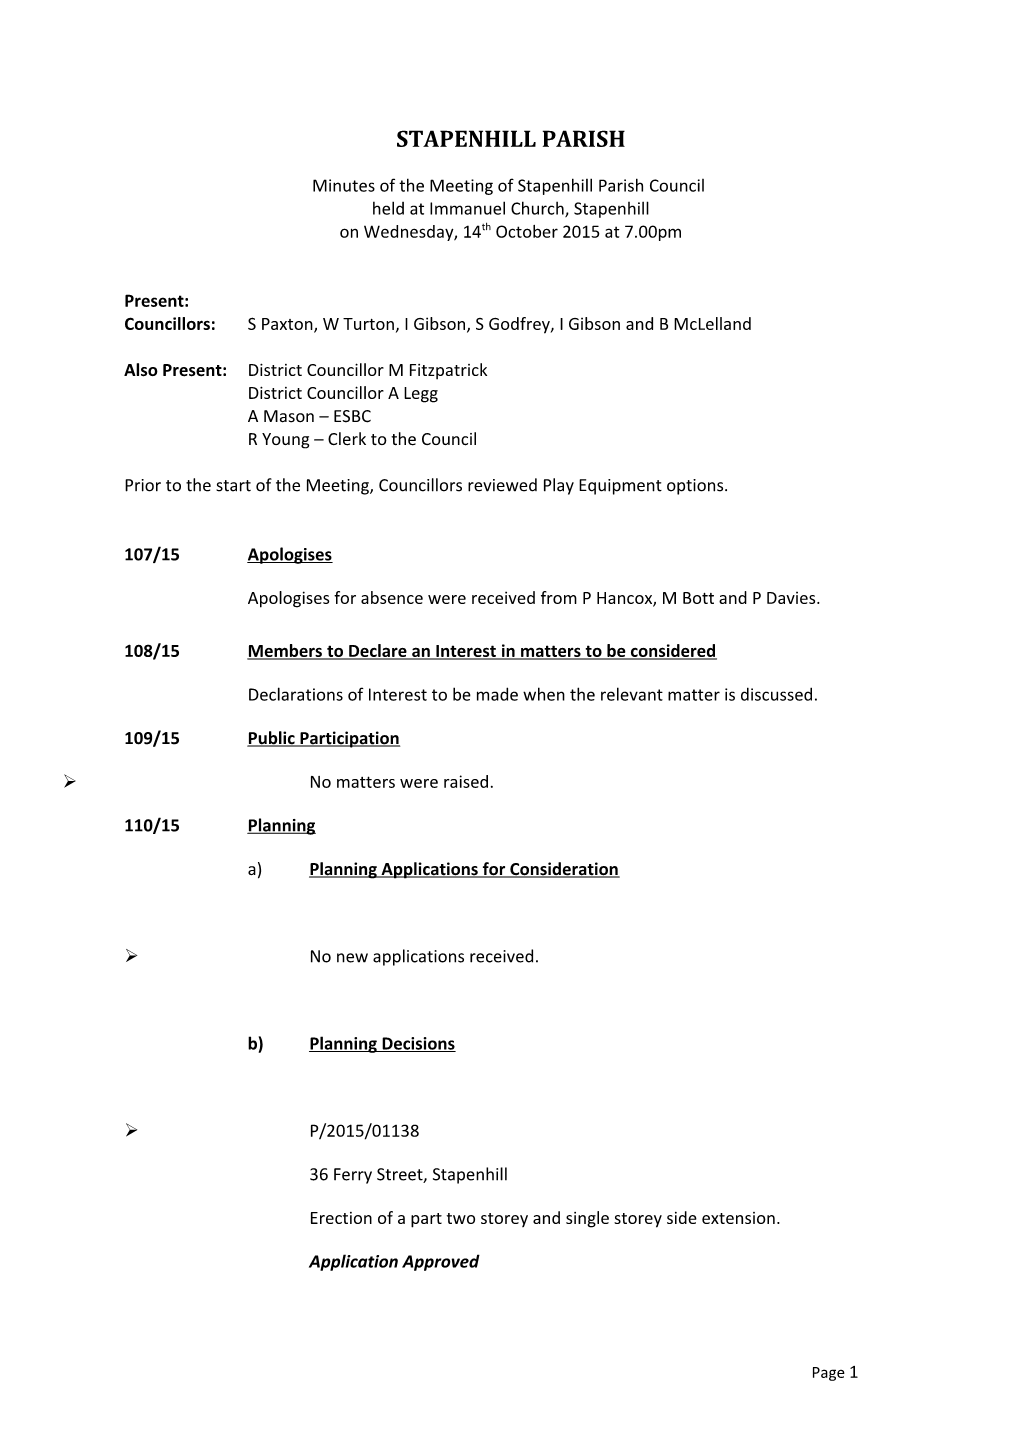 Minutes of the Meeting of Stapenhill Parish Council